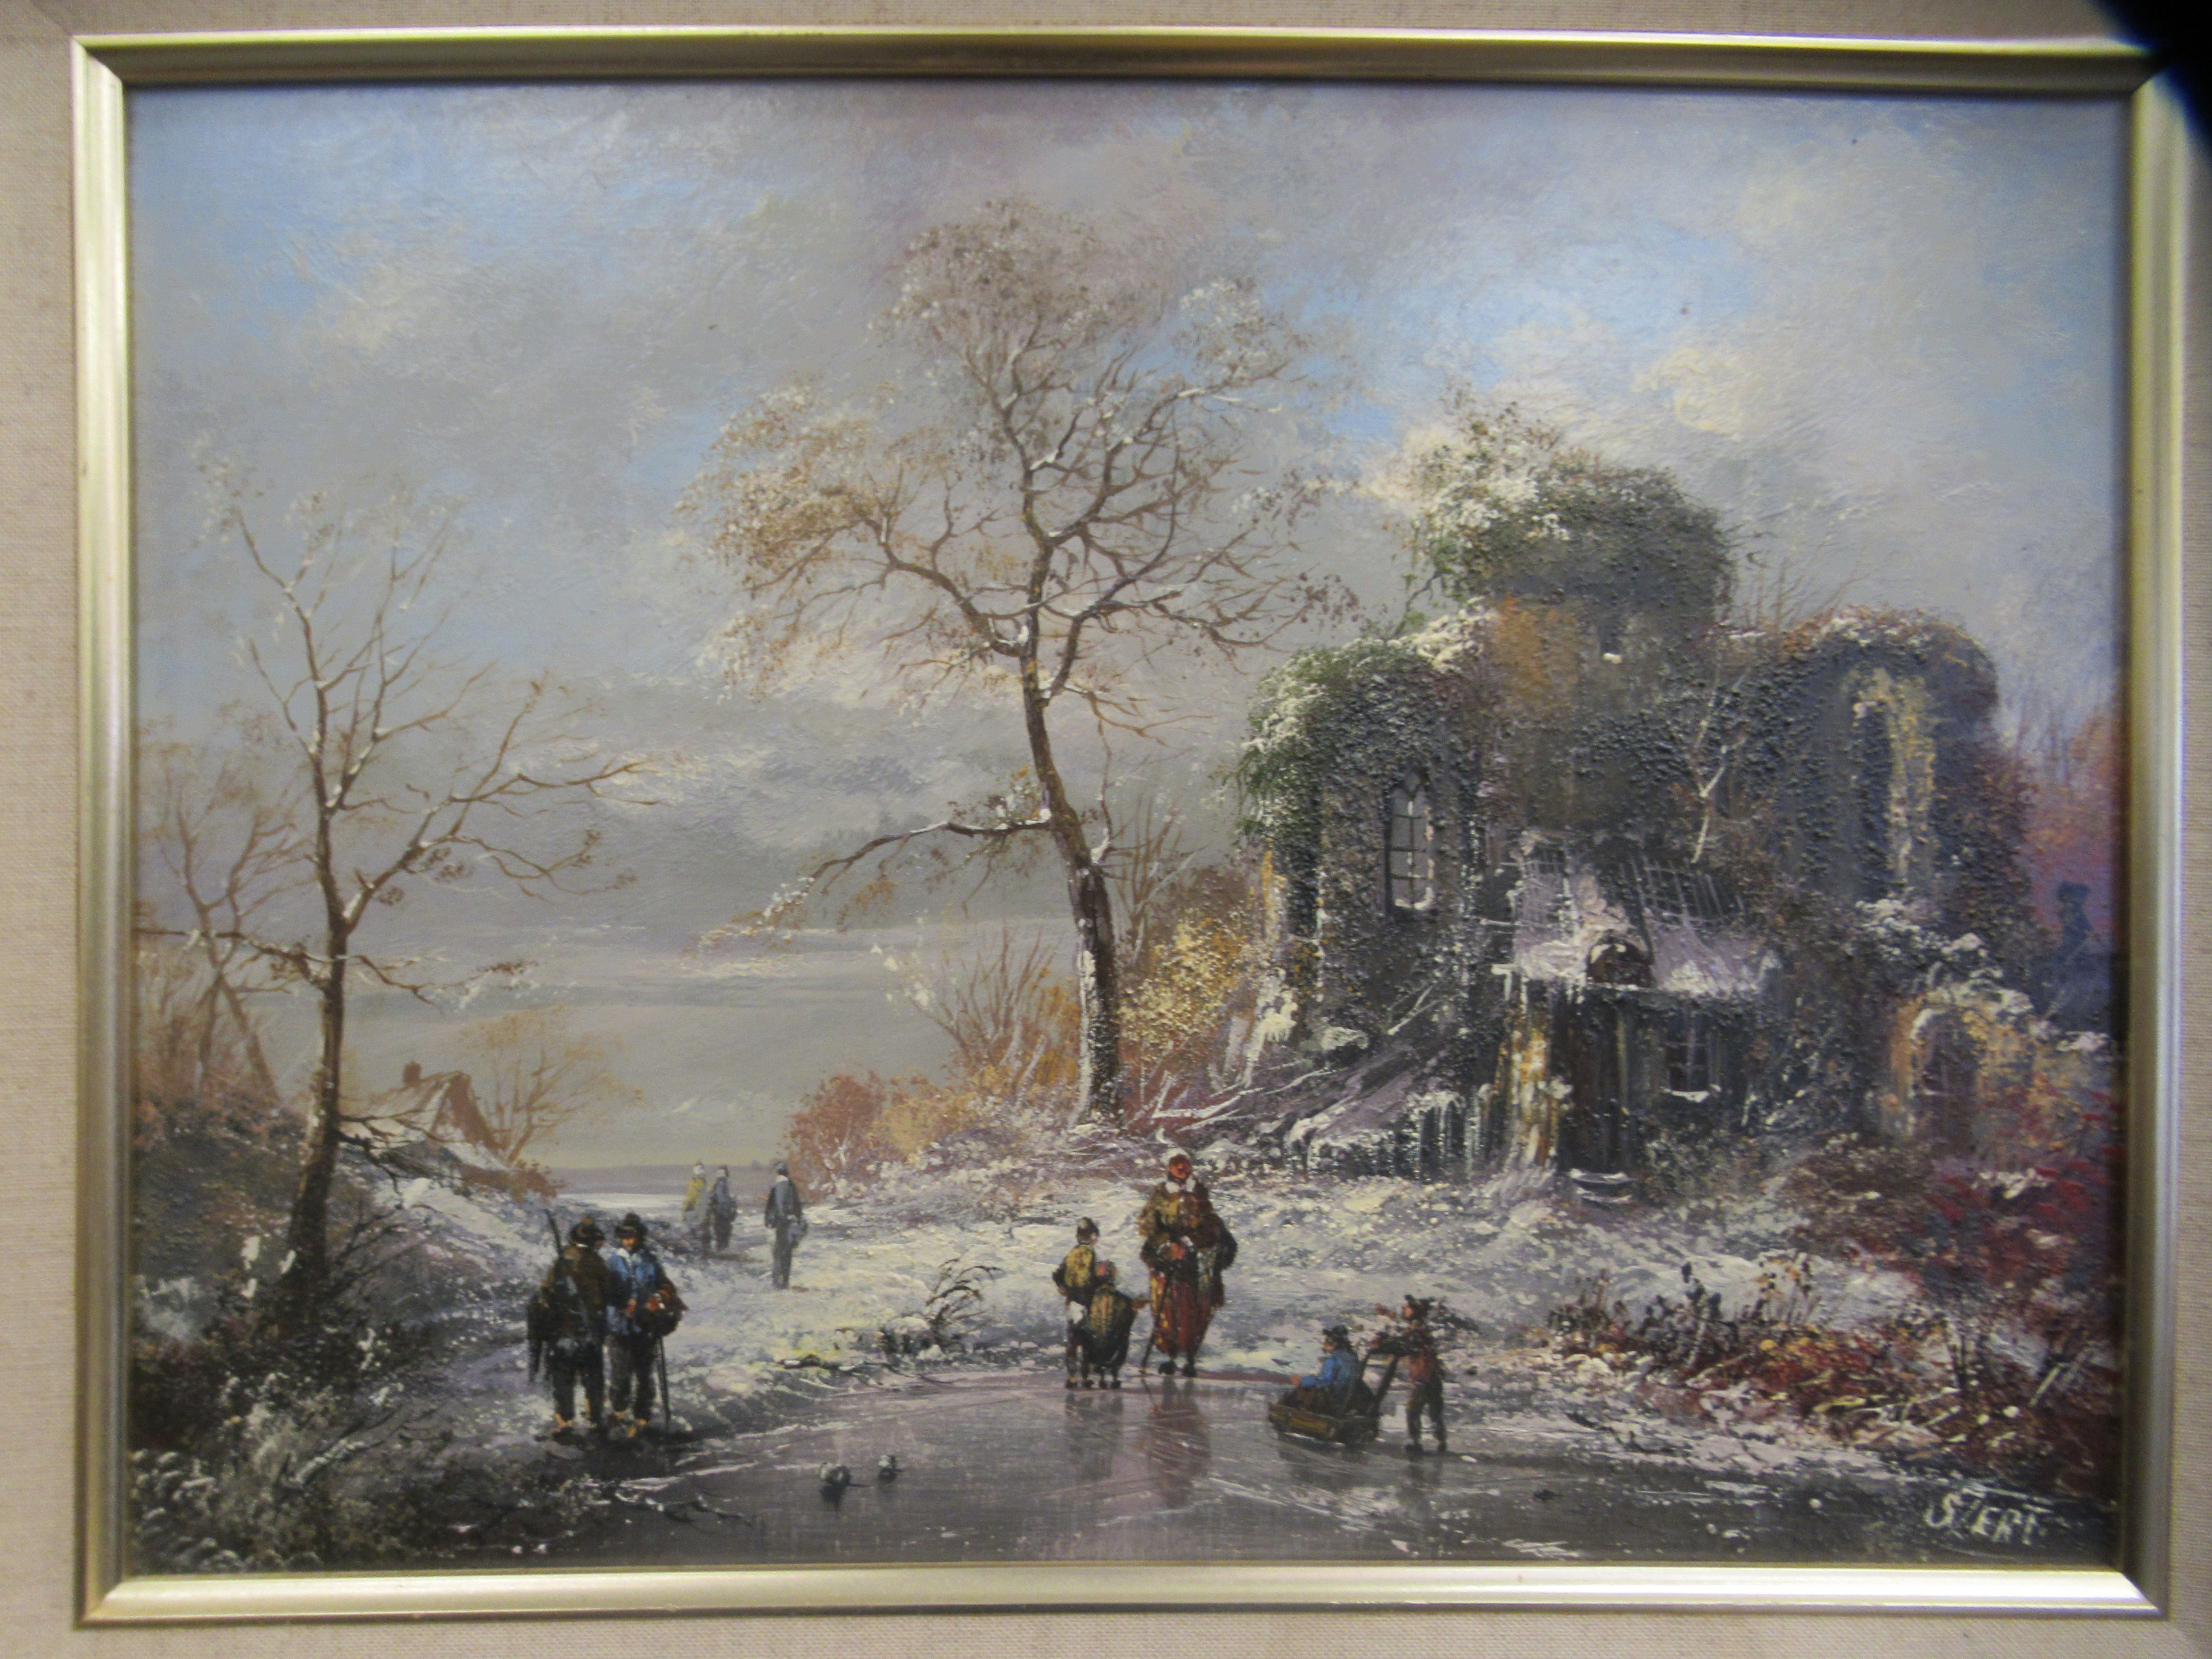 Stert - a winter landscape with figures on a frozen pond  oil on canvas  bears a signature  16" x